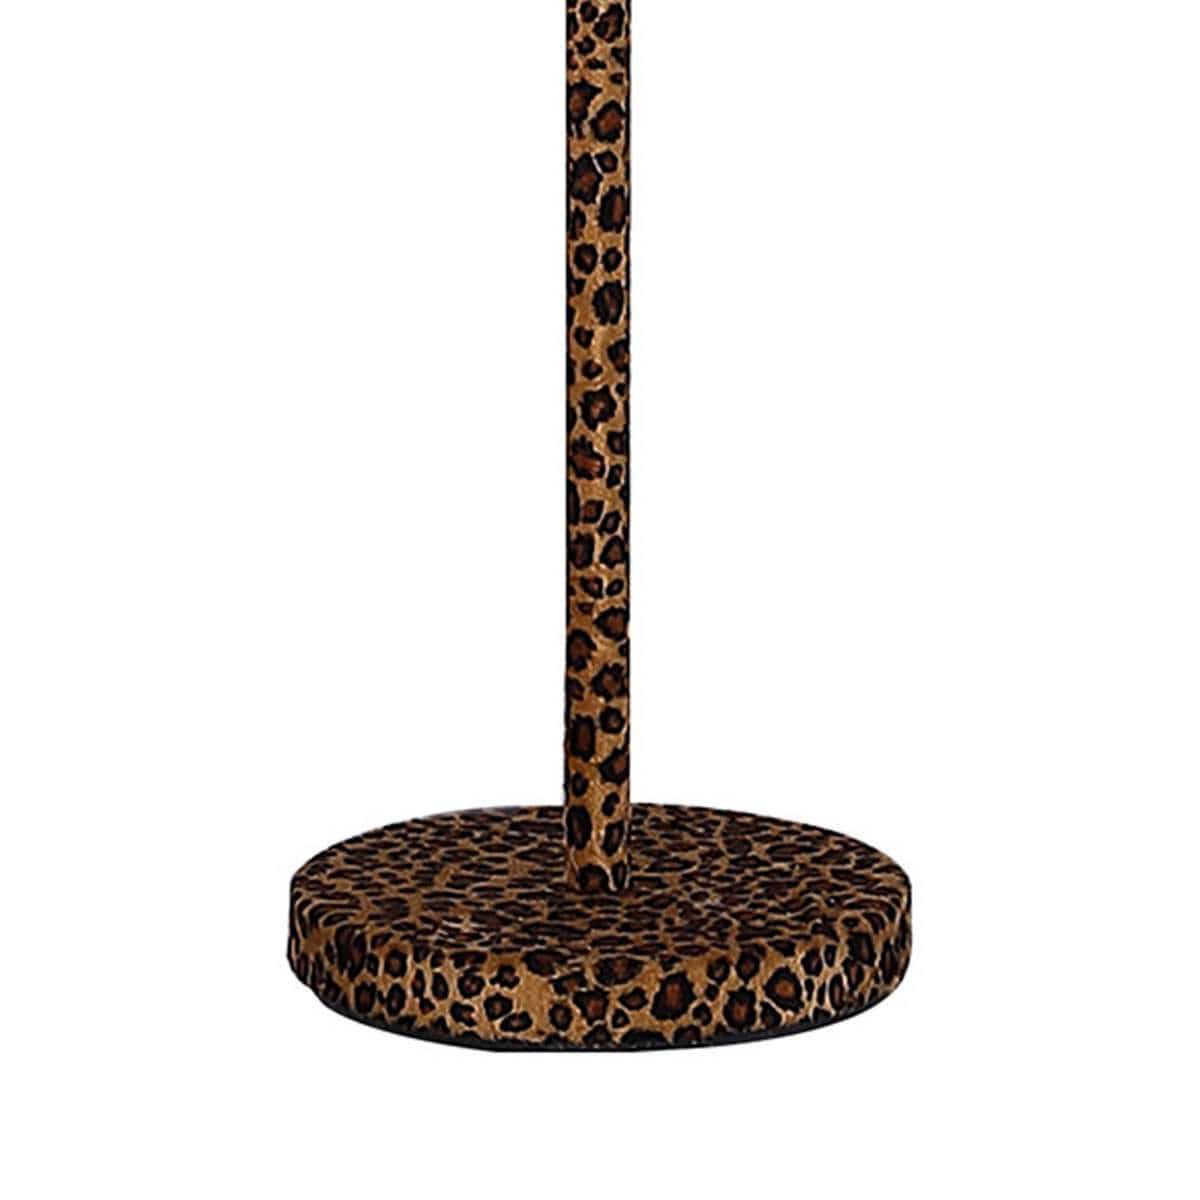 Benzara Fabric Wrapped Floor Lamp With Dotted Animal Print, Brown And Black By Benzara Floor Lamps BM233932